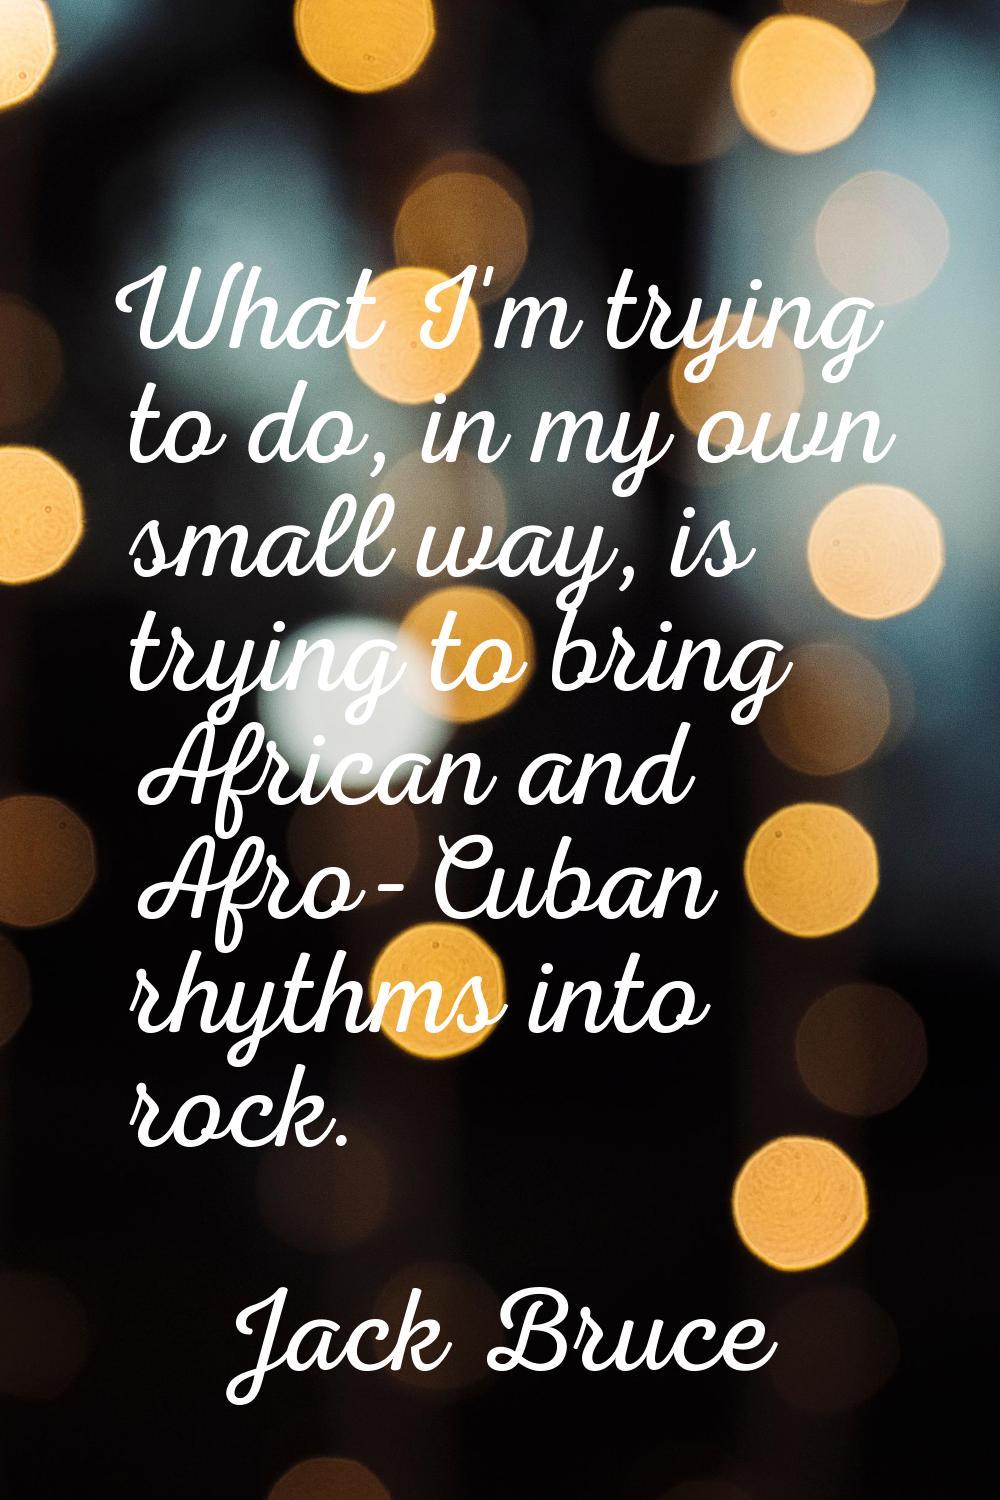 What I'm trying to do, in my own small way, is trying to bring African and Afro-Cuban rhythms into 